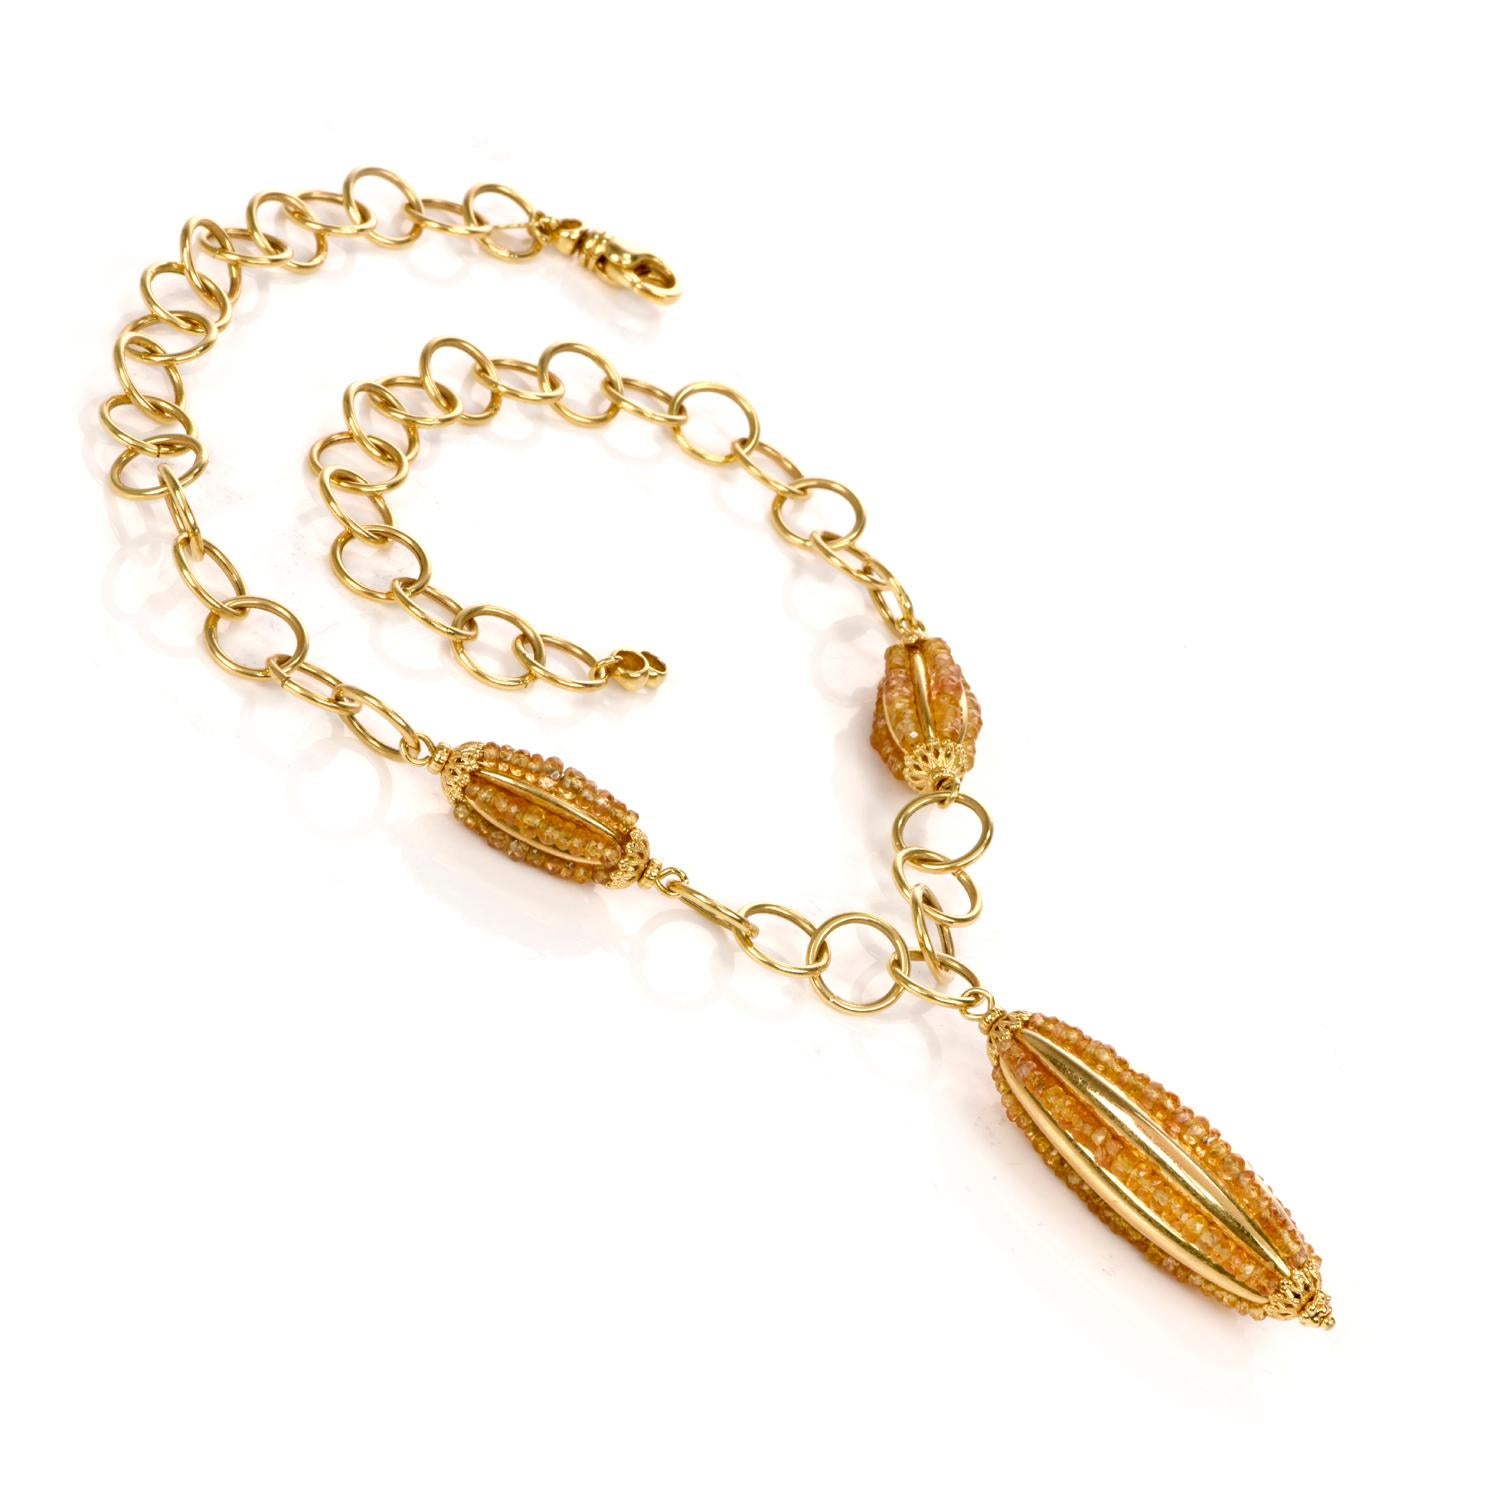  This Italian necklace is crafted in 14-karat yellow gold, weighing 29.6 grams and measuring 16.5 inches long. The elongated oval-shaped pendant measures 2 inches long and 15 mm wide, adorned with 5 rows of citrine beads. The necklace is composed of